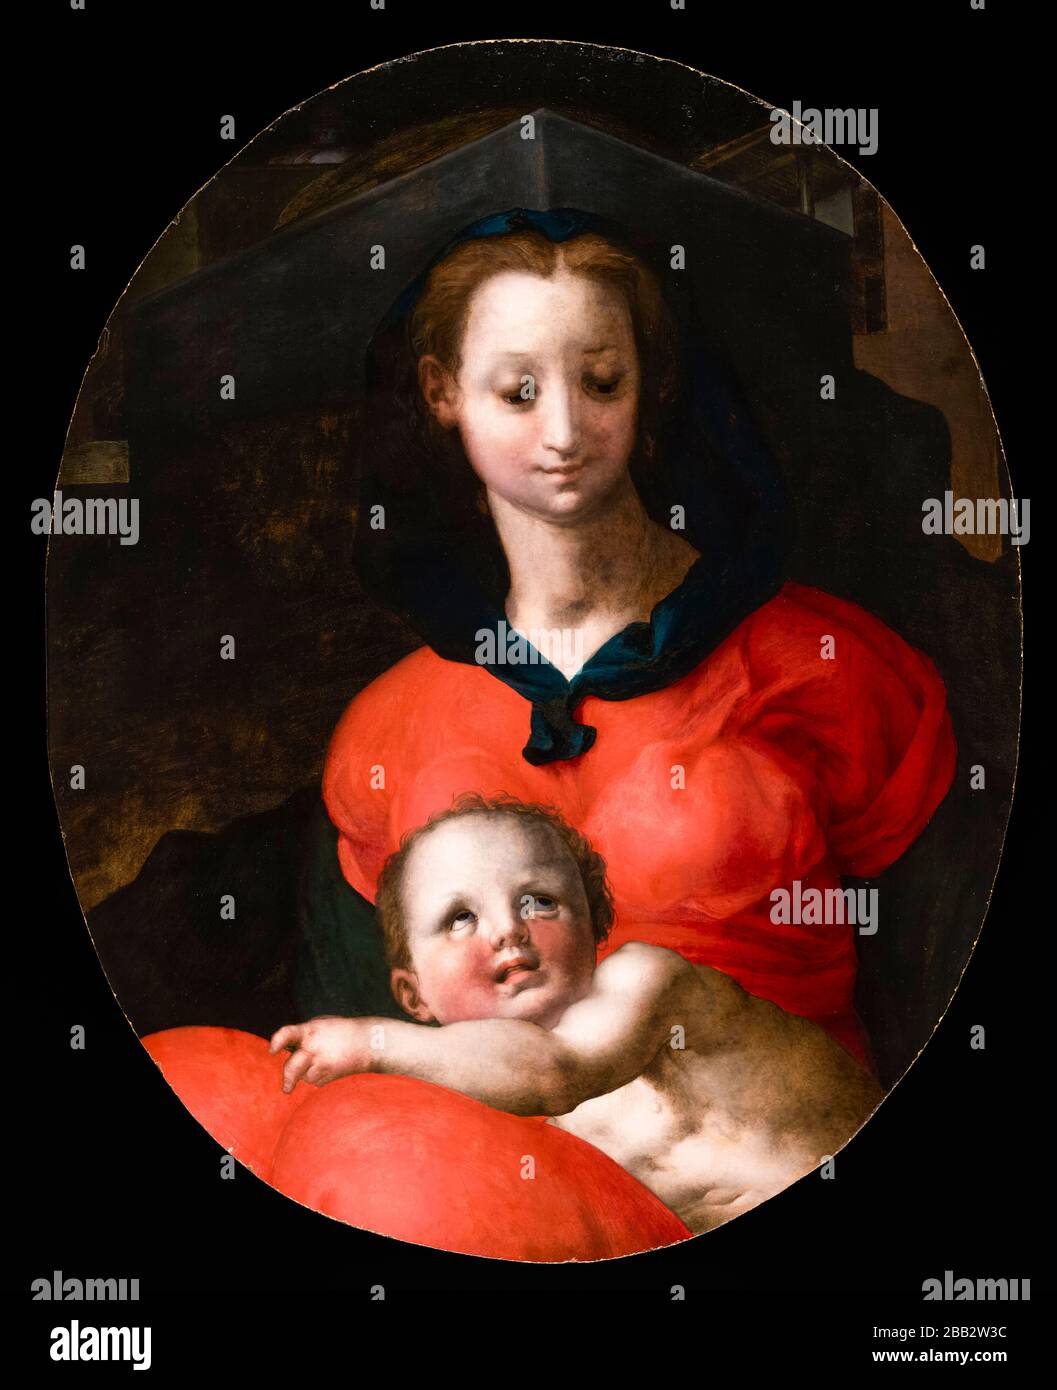 Pontormo, Jacopo Carucci, Virgin and Child, known as the, Madonna del Libro, painting, 1545-1546 Stock Photo